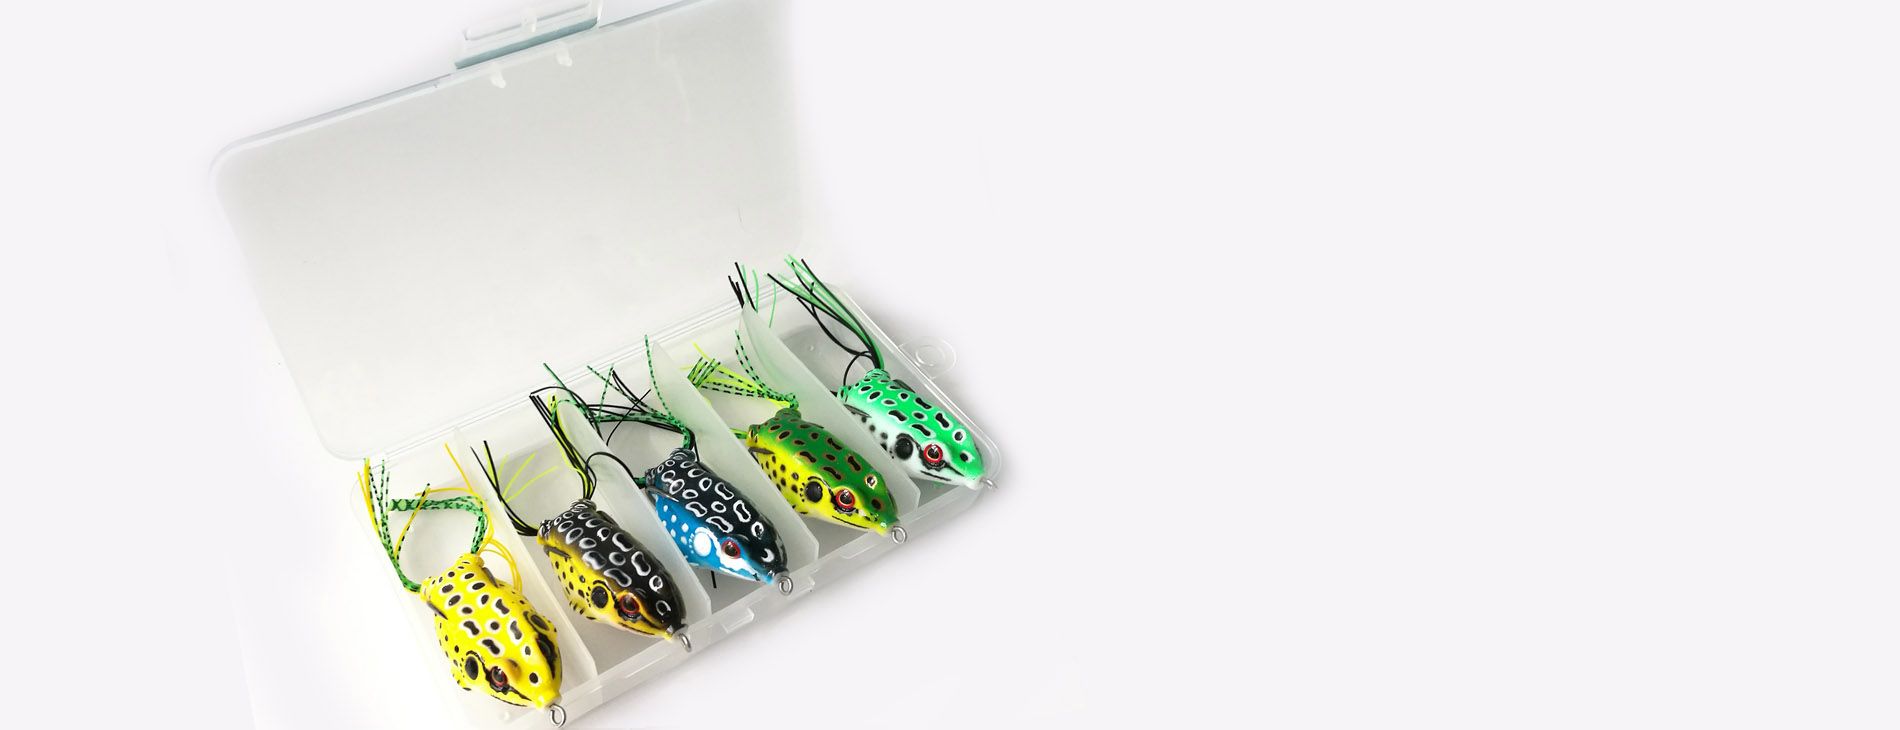 https://www.lenpaby.com/lenpaby-5pcs-frog-lure-ray-frog-topwater-fishing-crankbait-lures-artificial-soft-bait-5-5cm-8g-soft-tube-bait-especiallyfreshwater-soft-bai-musky-tackle-box-spitted-weedless-bas-for-bass-snakehead.html